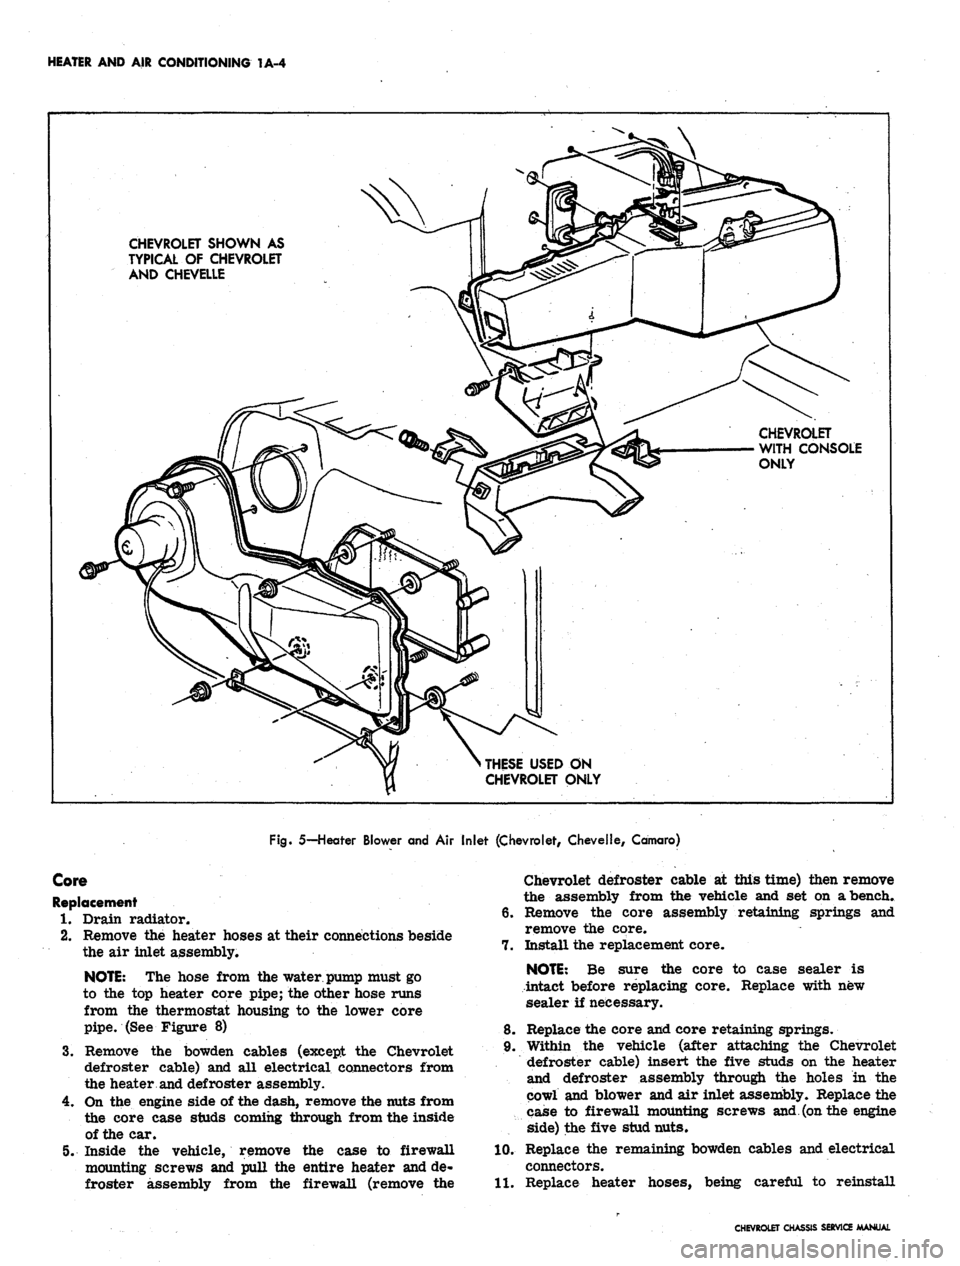 CHEVROLET CAMARO 1967 1.G Chassis Workshop Manual 
HEATER AND AIR CONDITIONING 1A-4

CHEVROLET SHOWN AS

TYPICAL OF CHEVROLET

AND CHEVELLE

CHEVROLET

WITH CONSOLE

ONLY

THESE USED ON

CHEVROLET ONLY

Fig. 5— Heater Blower and
 Air
 Inlet (Chevro